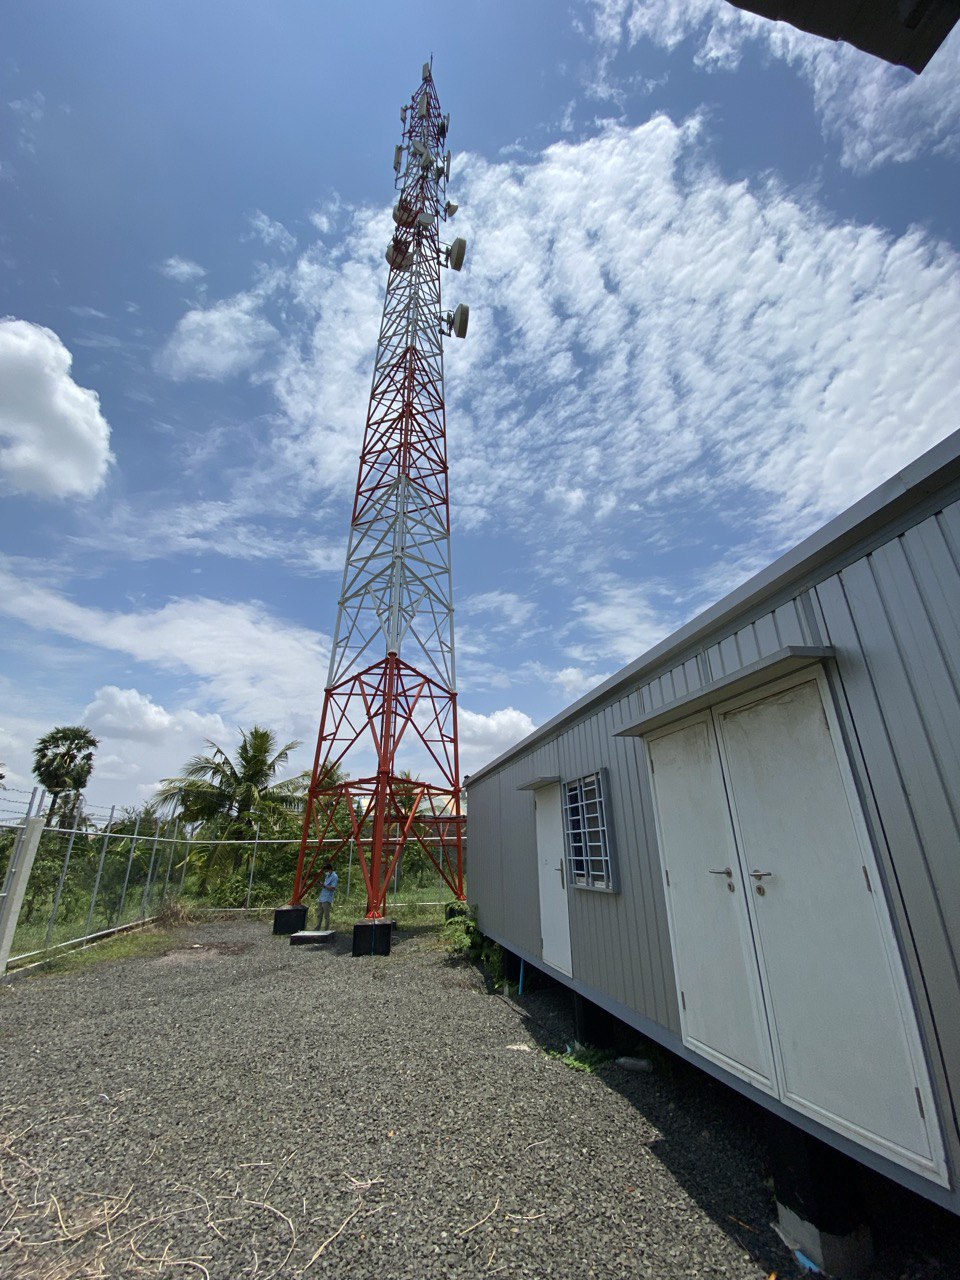 GuarantCo Provides $70M Bond Guarantee To CamGSM For Telecom Infrastructure Expansion In Cambodia